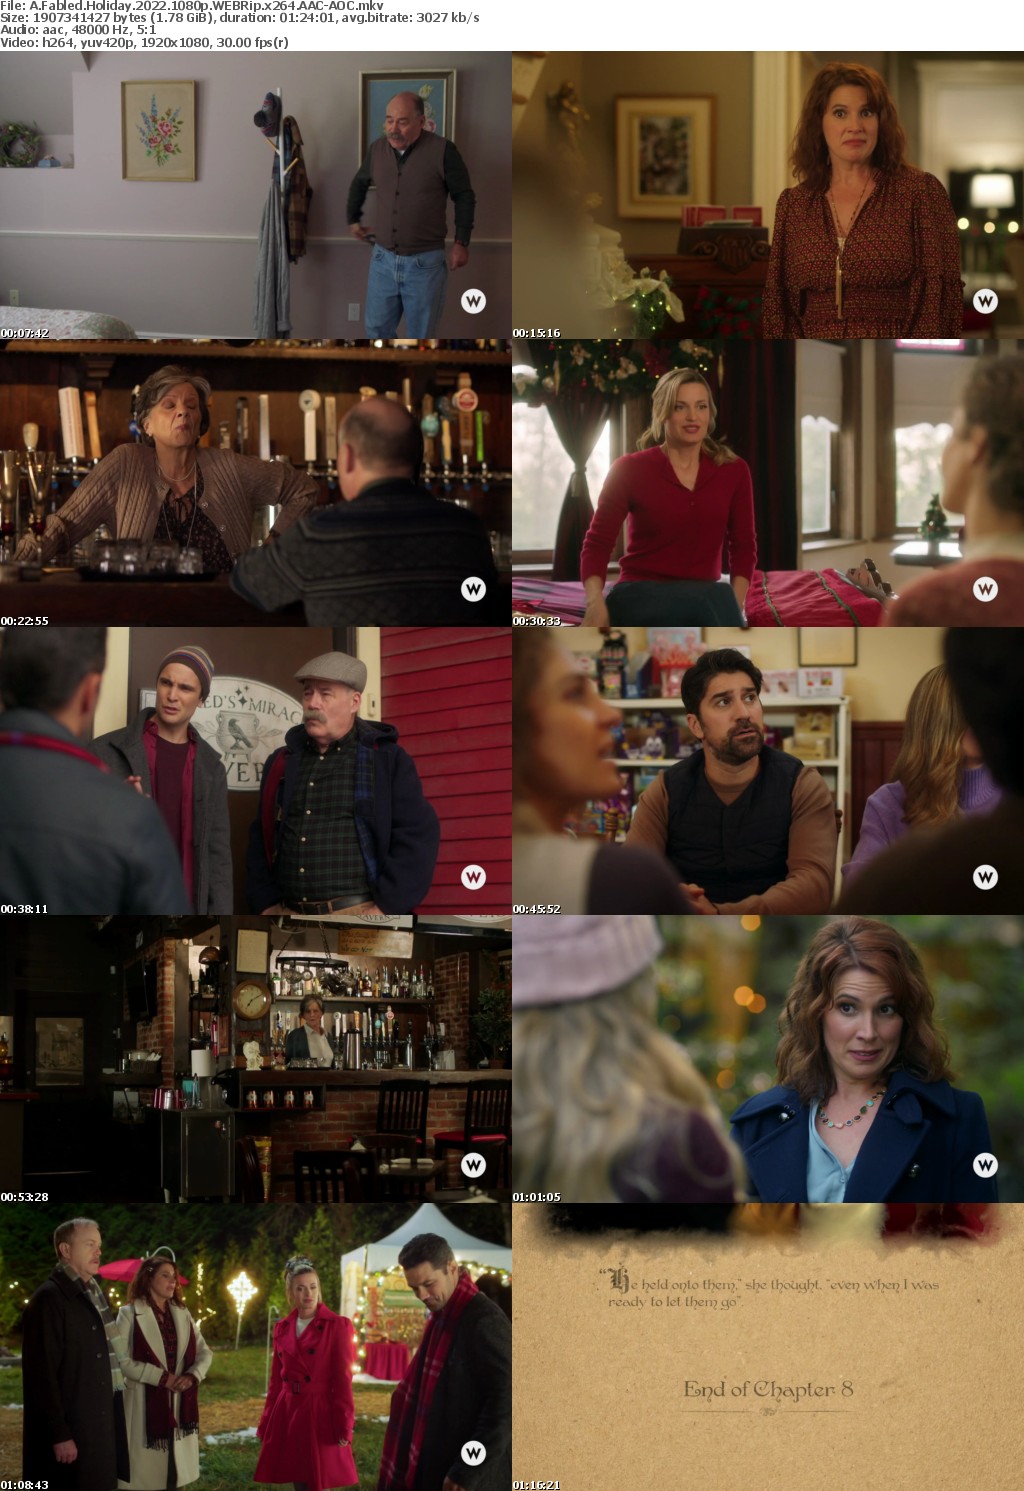 A Fabled Holiday 2022 1080p WEBRip x264 AAC-AOC